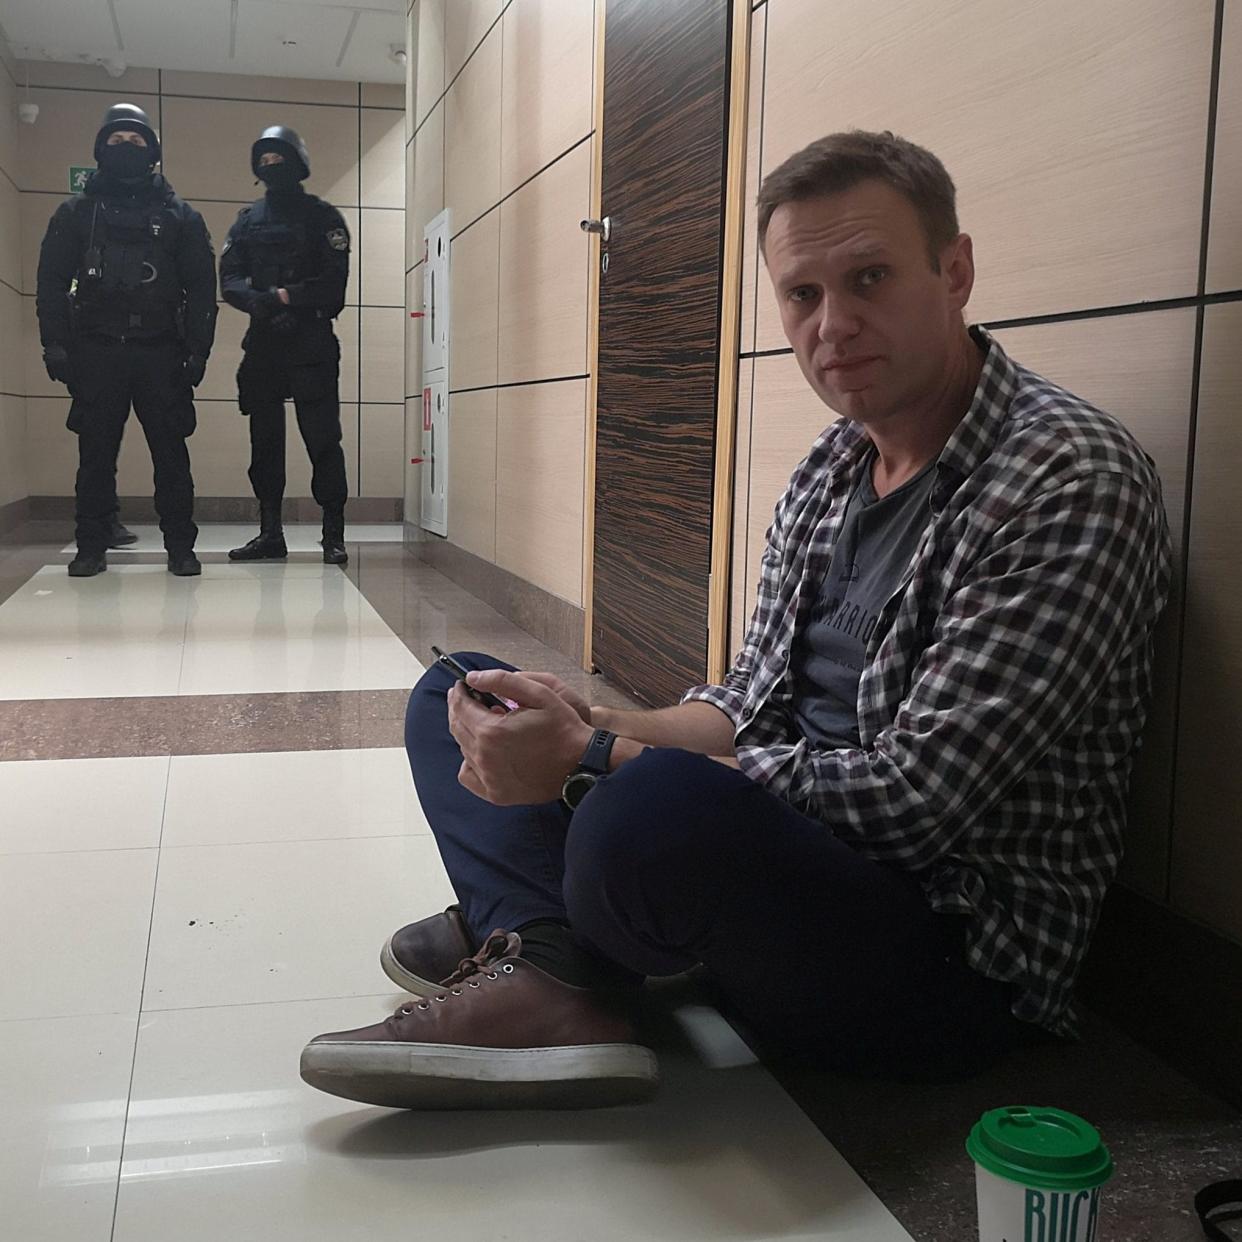 Russian opposition politician Navalny sits on the floor during a police raid of his office in Moscow - VIA REUTERS